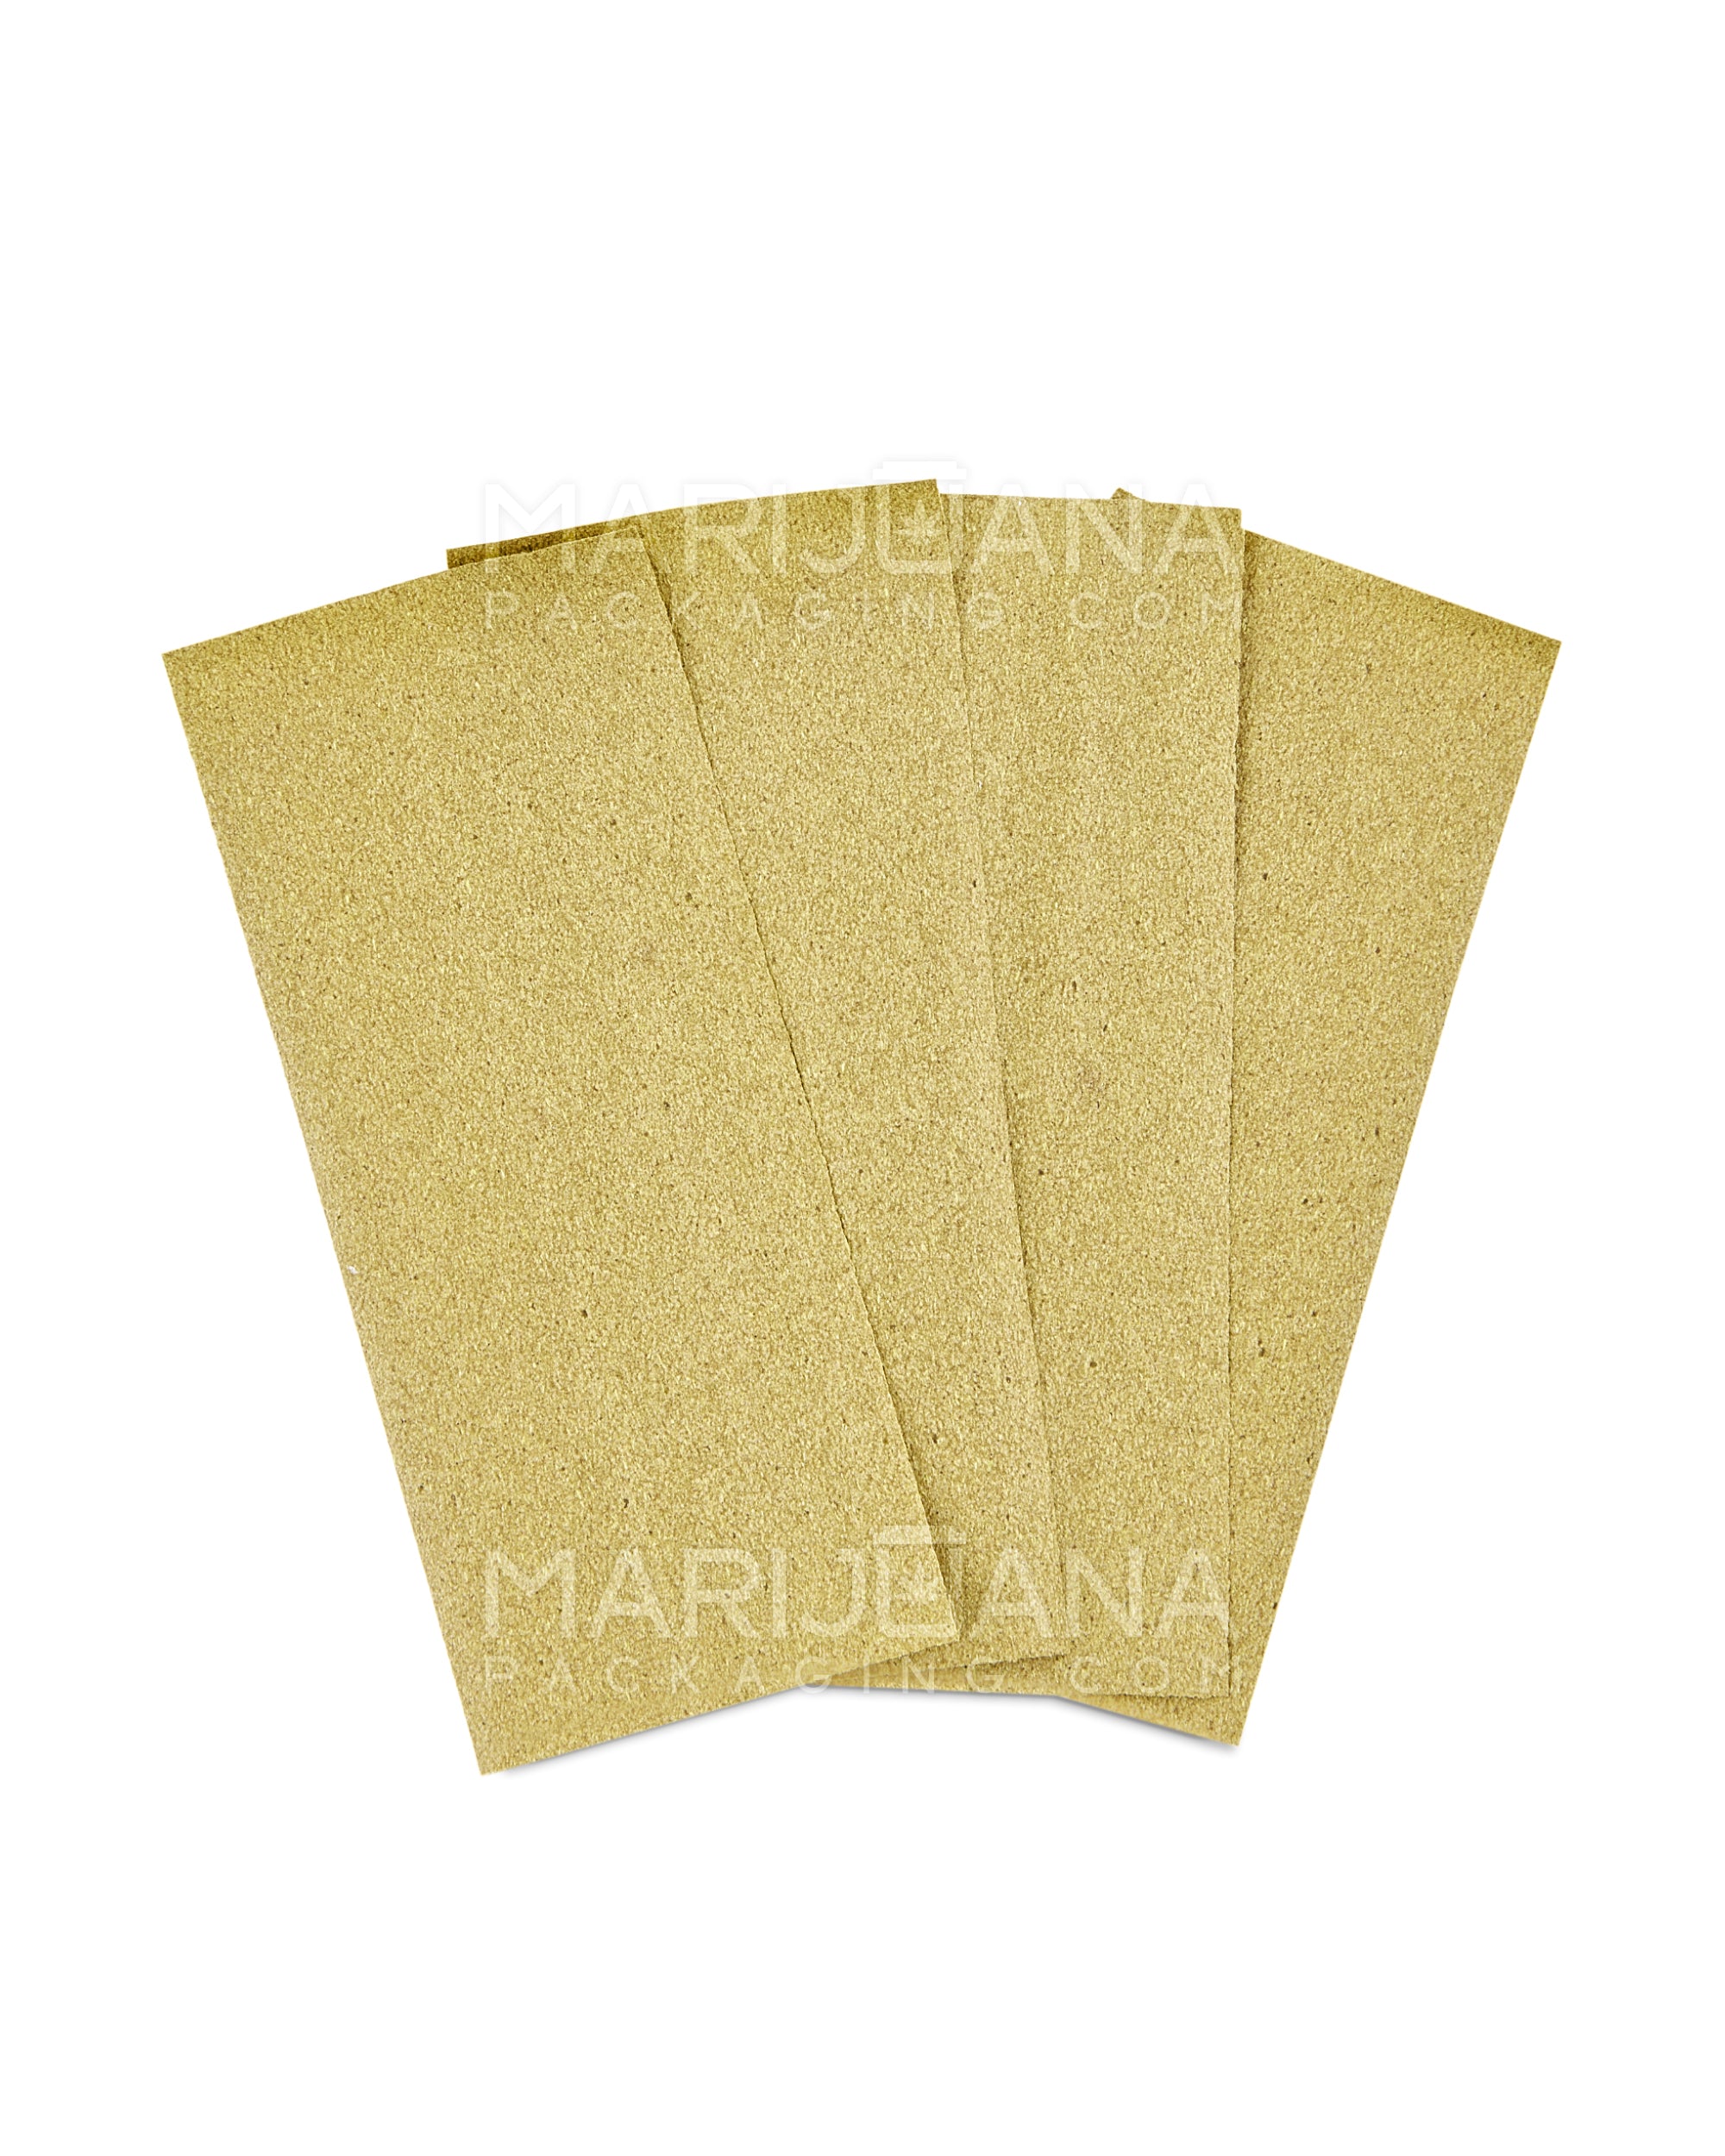 TWISTED HEMP | 'Retail Display' Blunt Wraps | 100mm - Endless Summer - 15 Count - 6